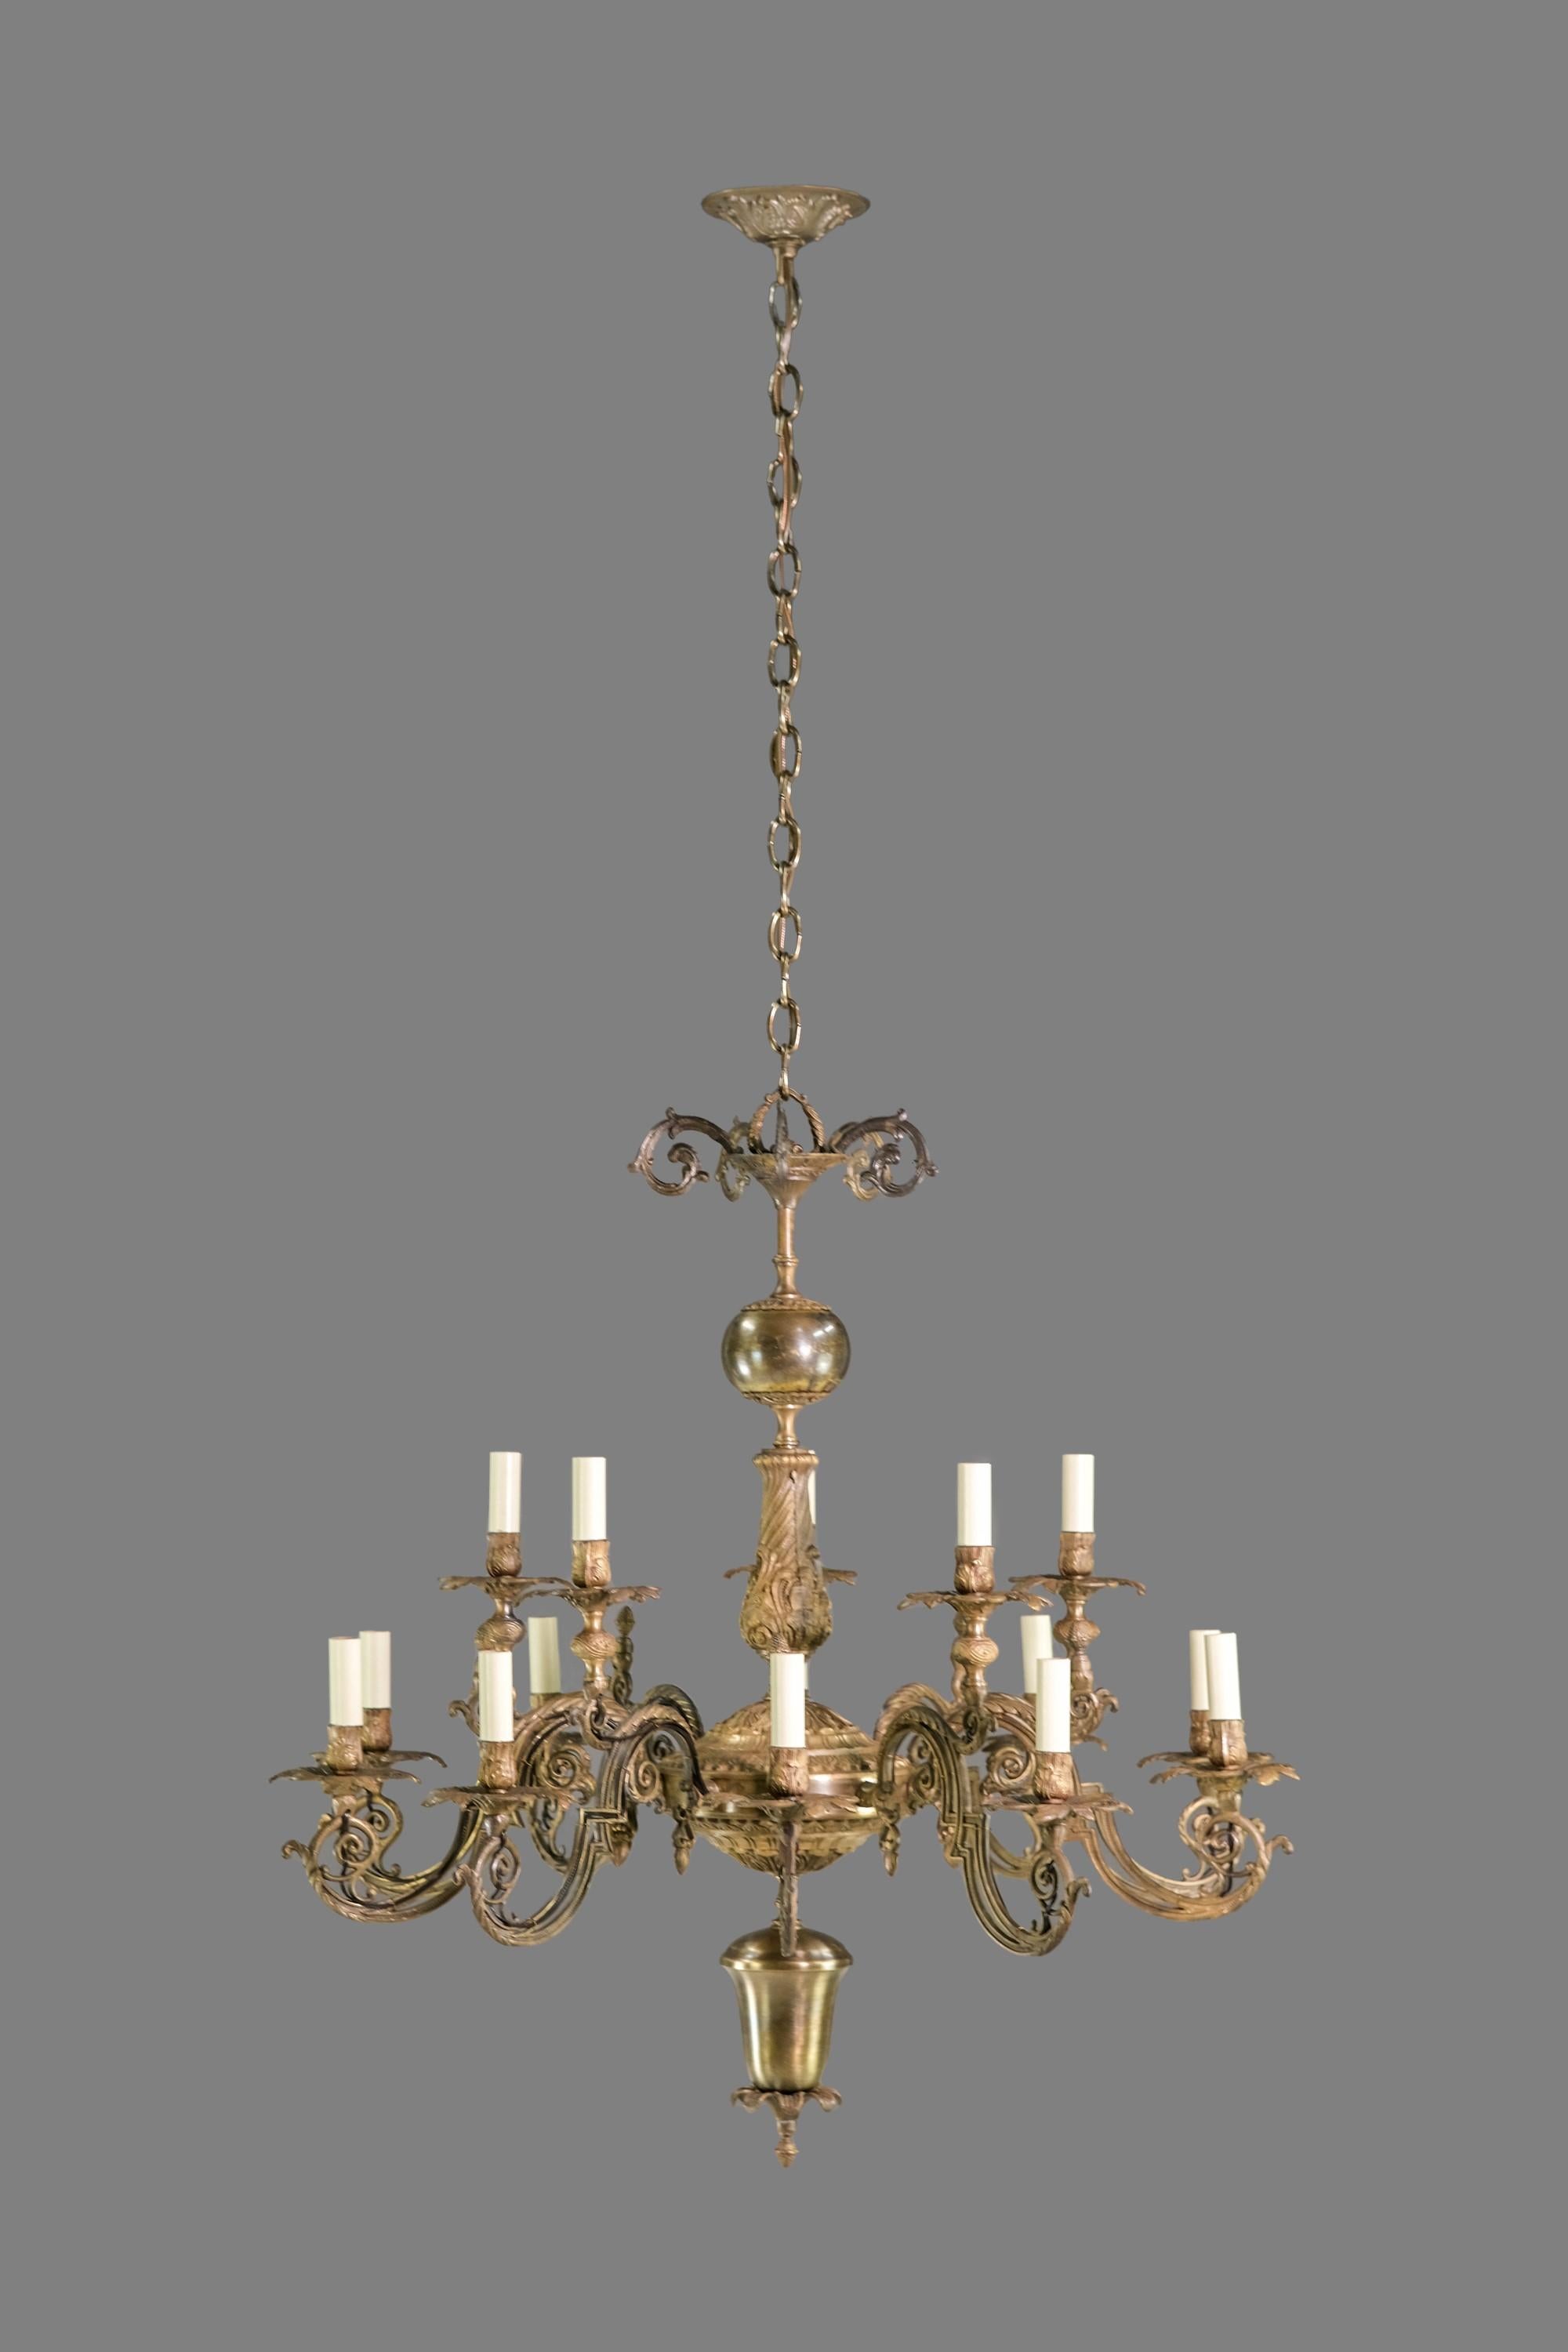 20th Century brass and brass finished Victorian chandelier with 10 arms arranged in 2 tiers. Floral design with small flower buds and leaves. Cleaned and restored. Takes 15 standard medium base light bulbs. Please note, this item is located in one